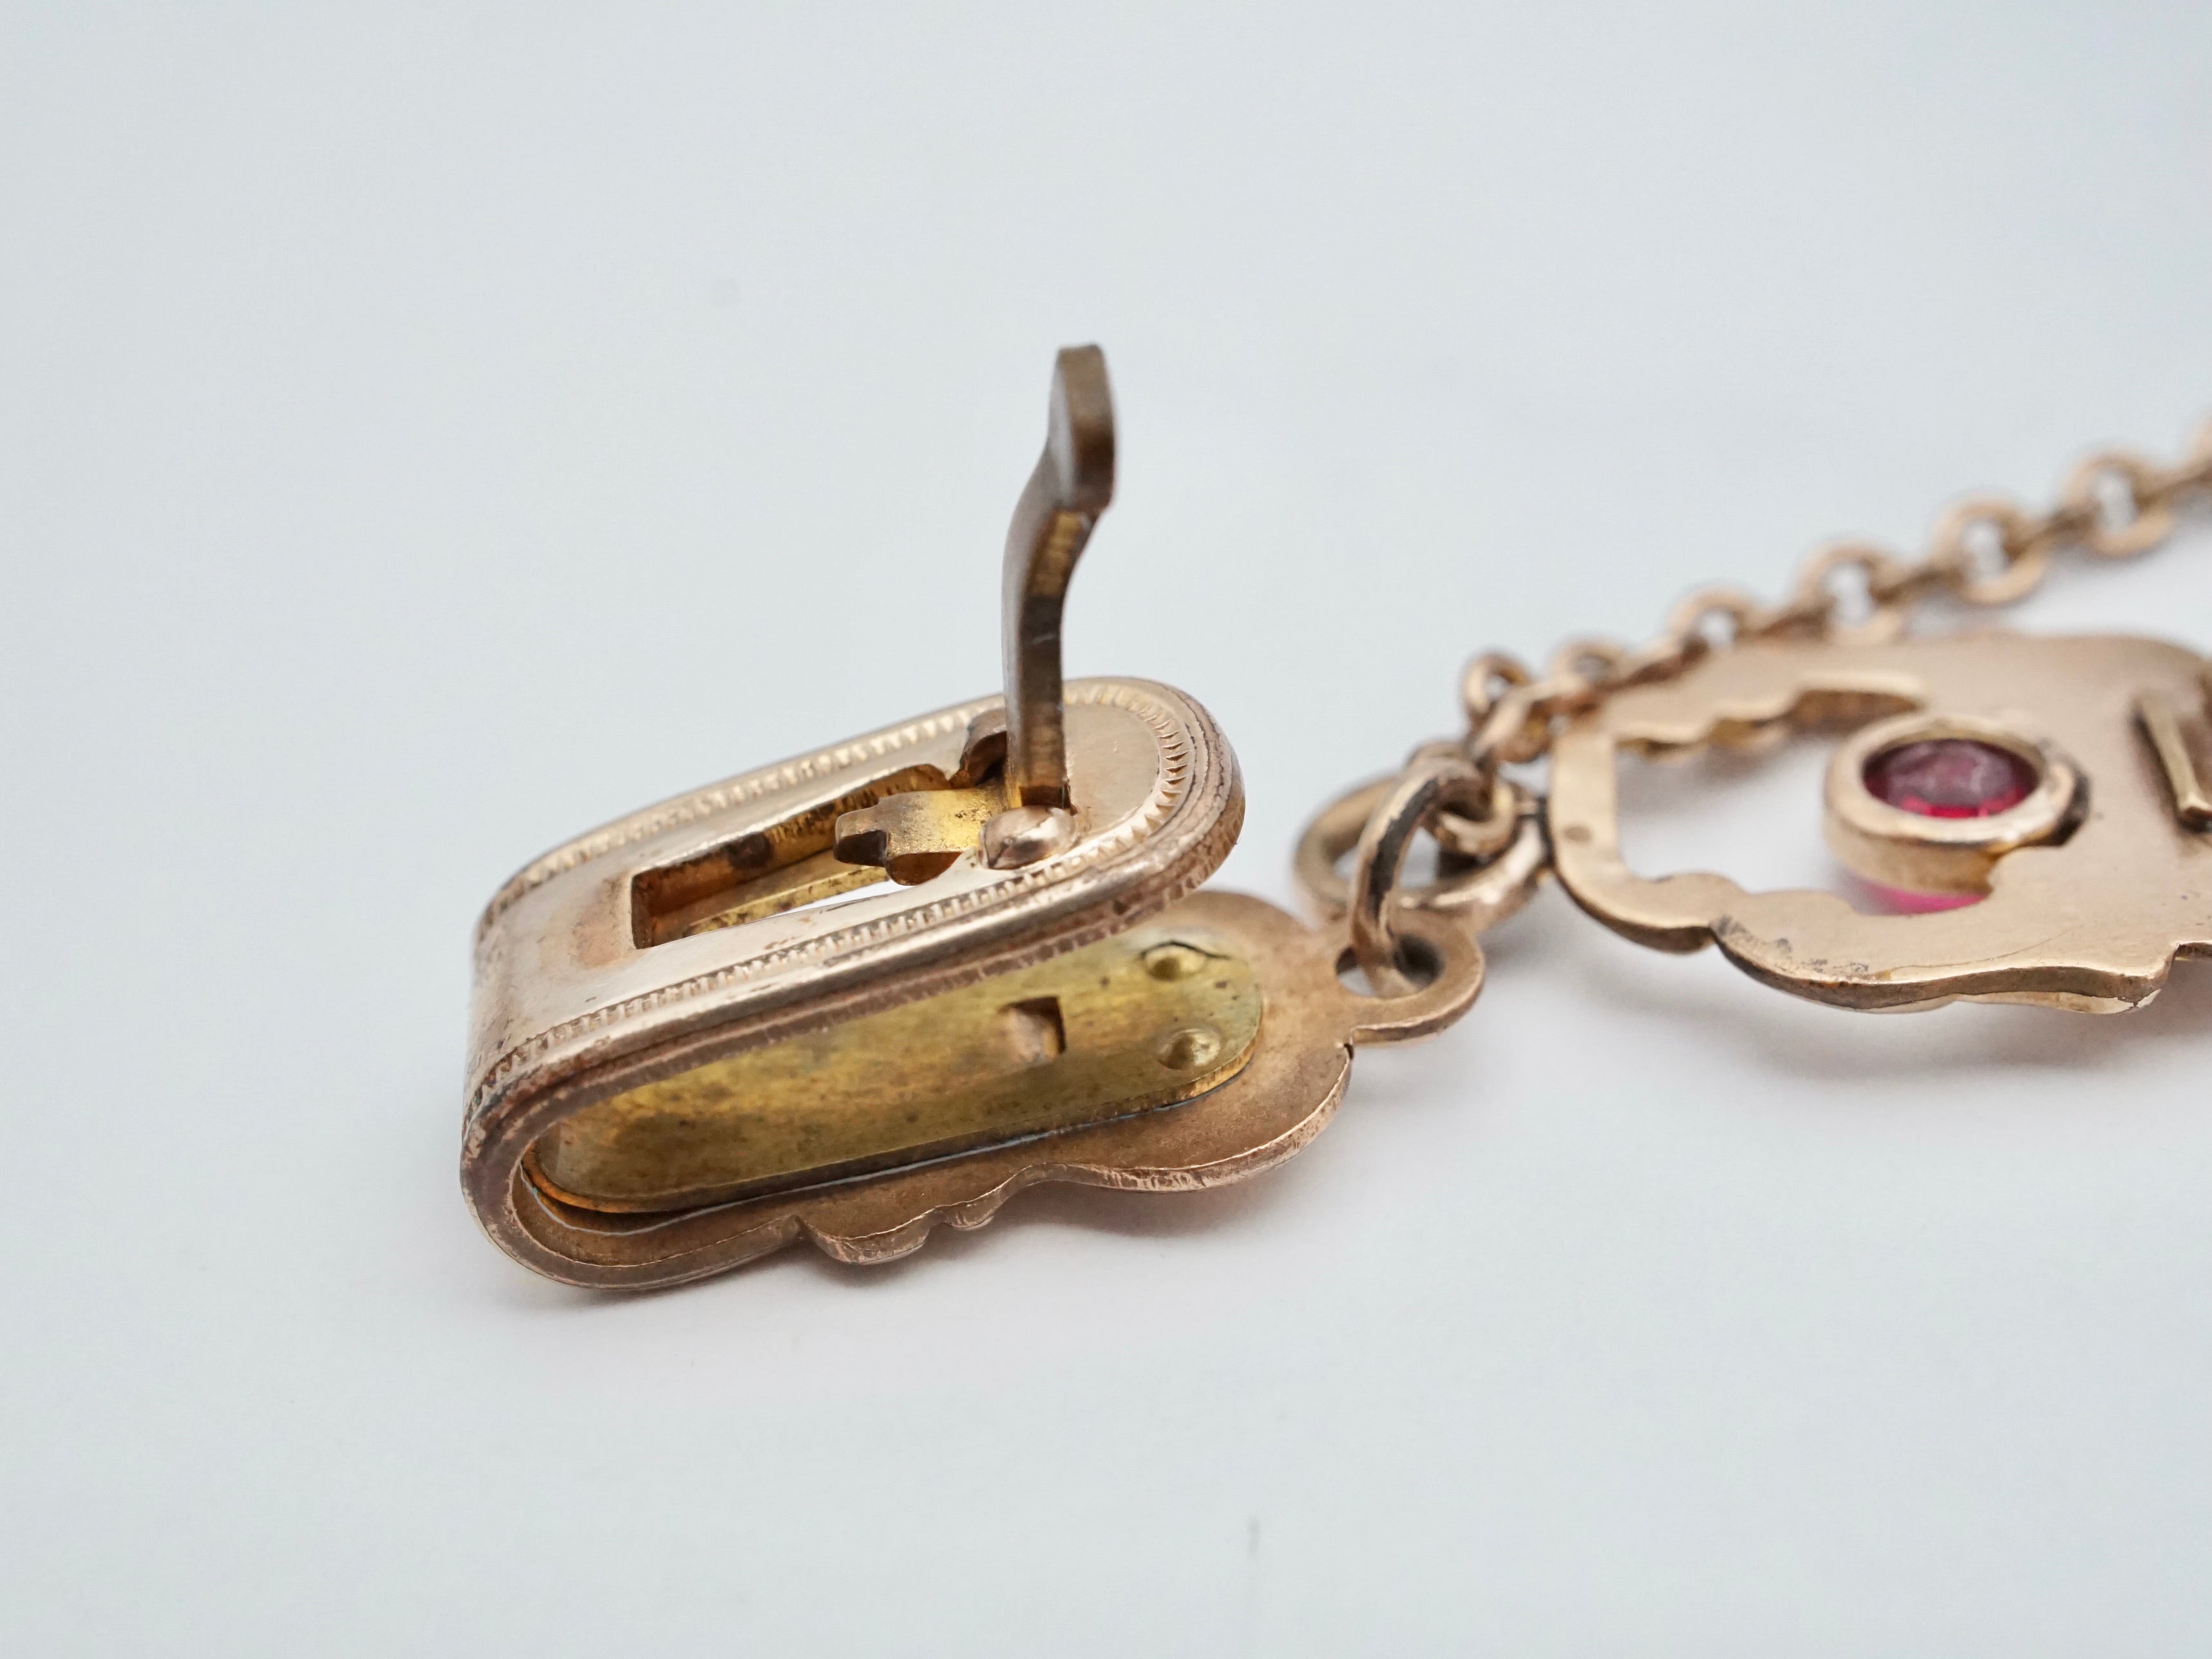 Antique Victorian gold filled long drop watch fob and chain with ruby paste and dog clip